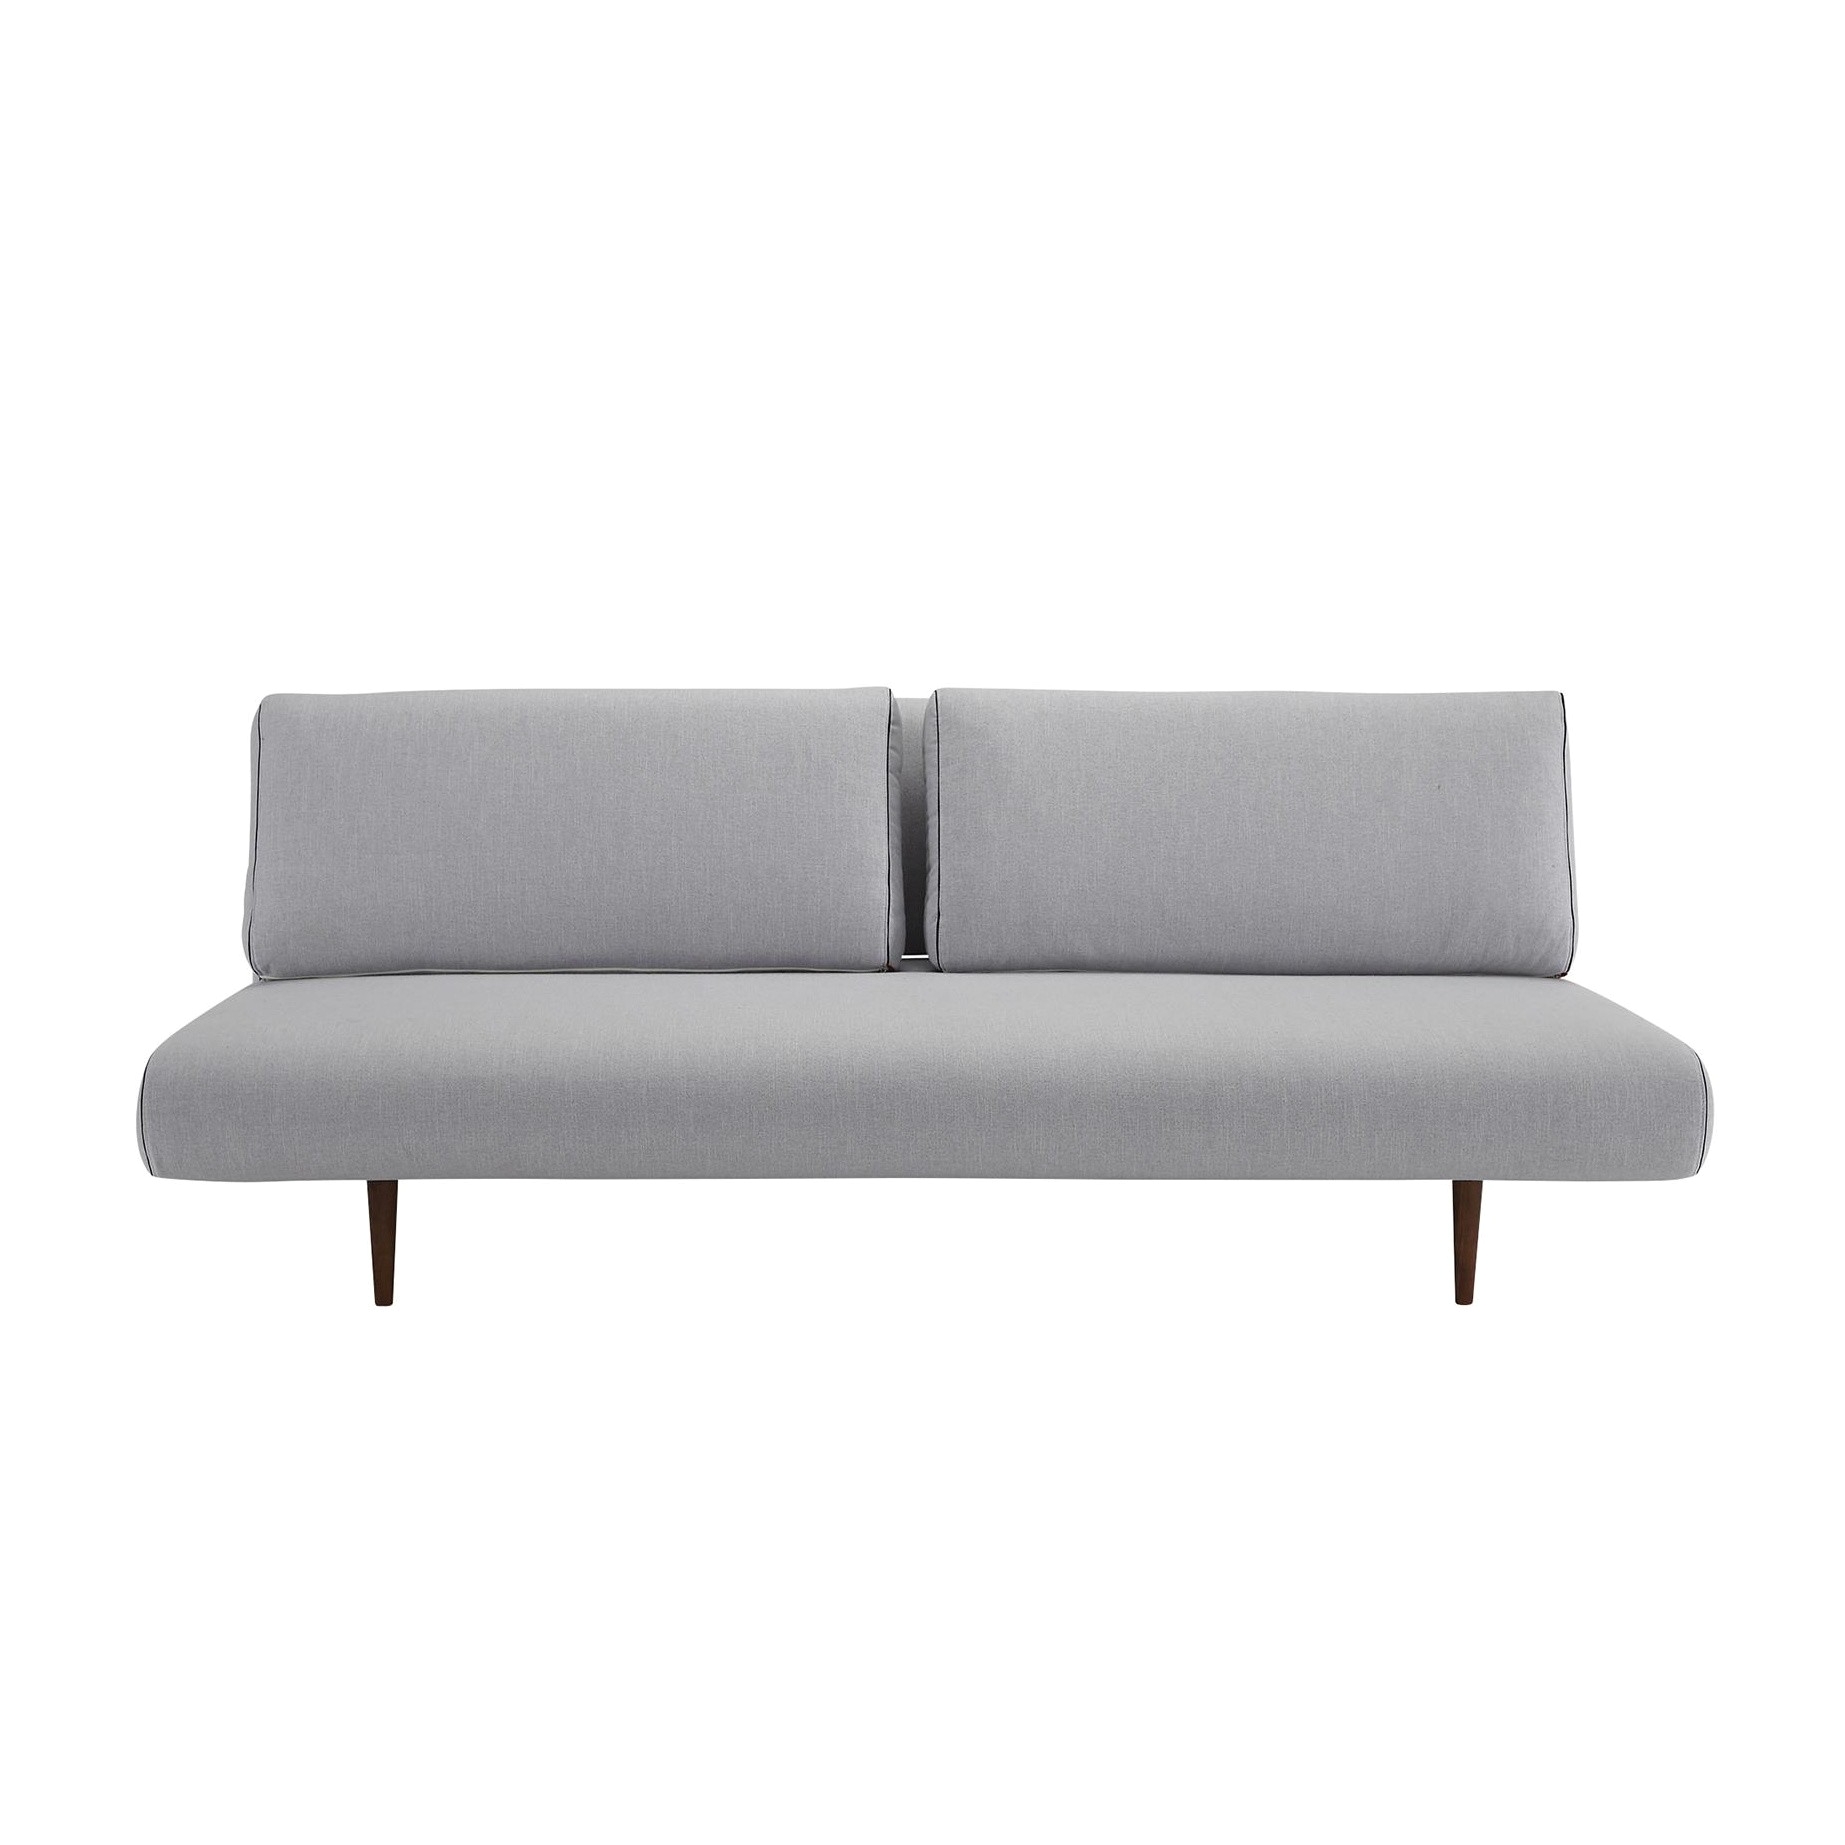 Innovation Unfurl Lounger Sofa Bed light grey fabric 517 Elegance with cushions